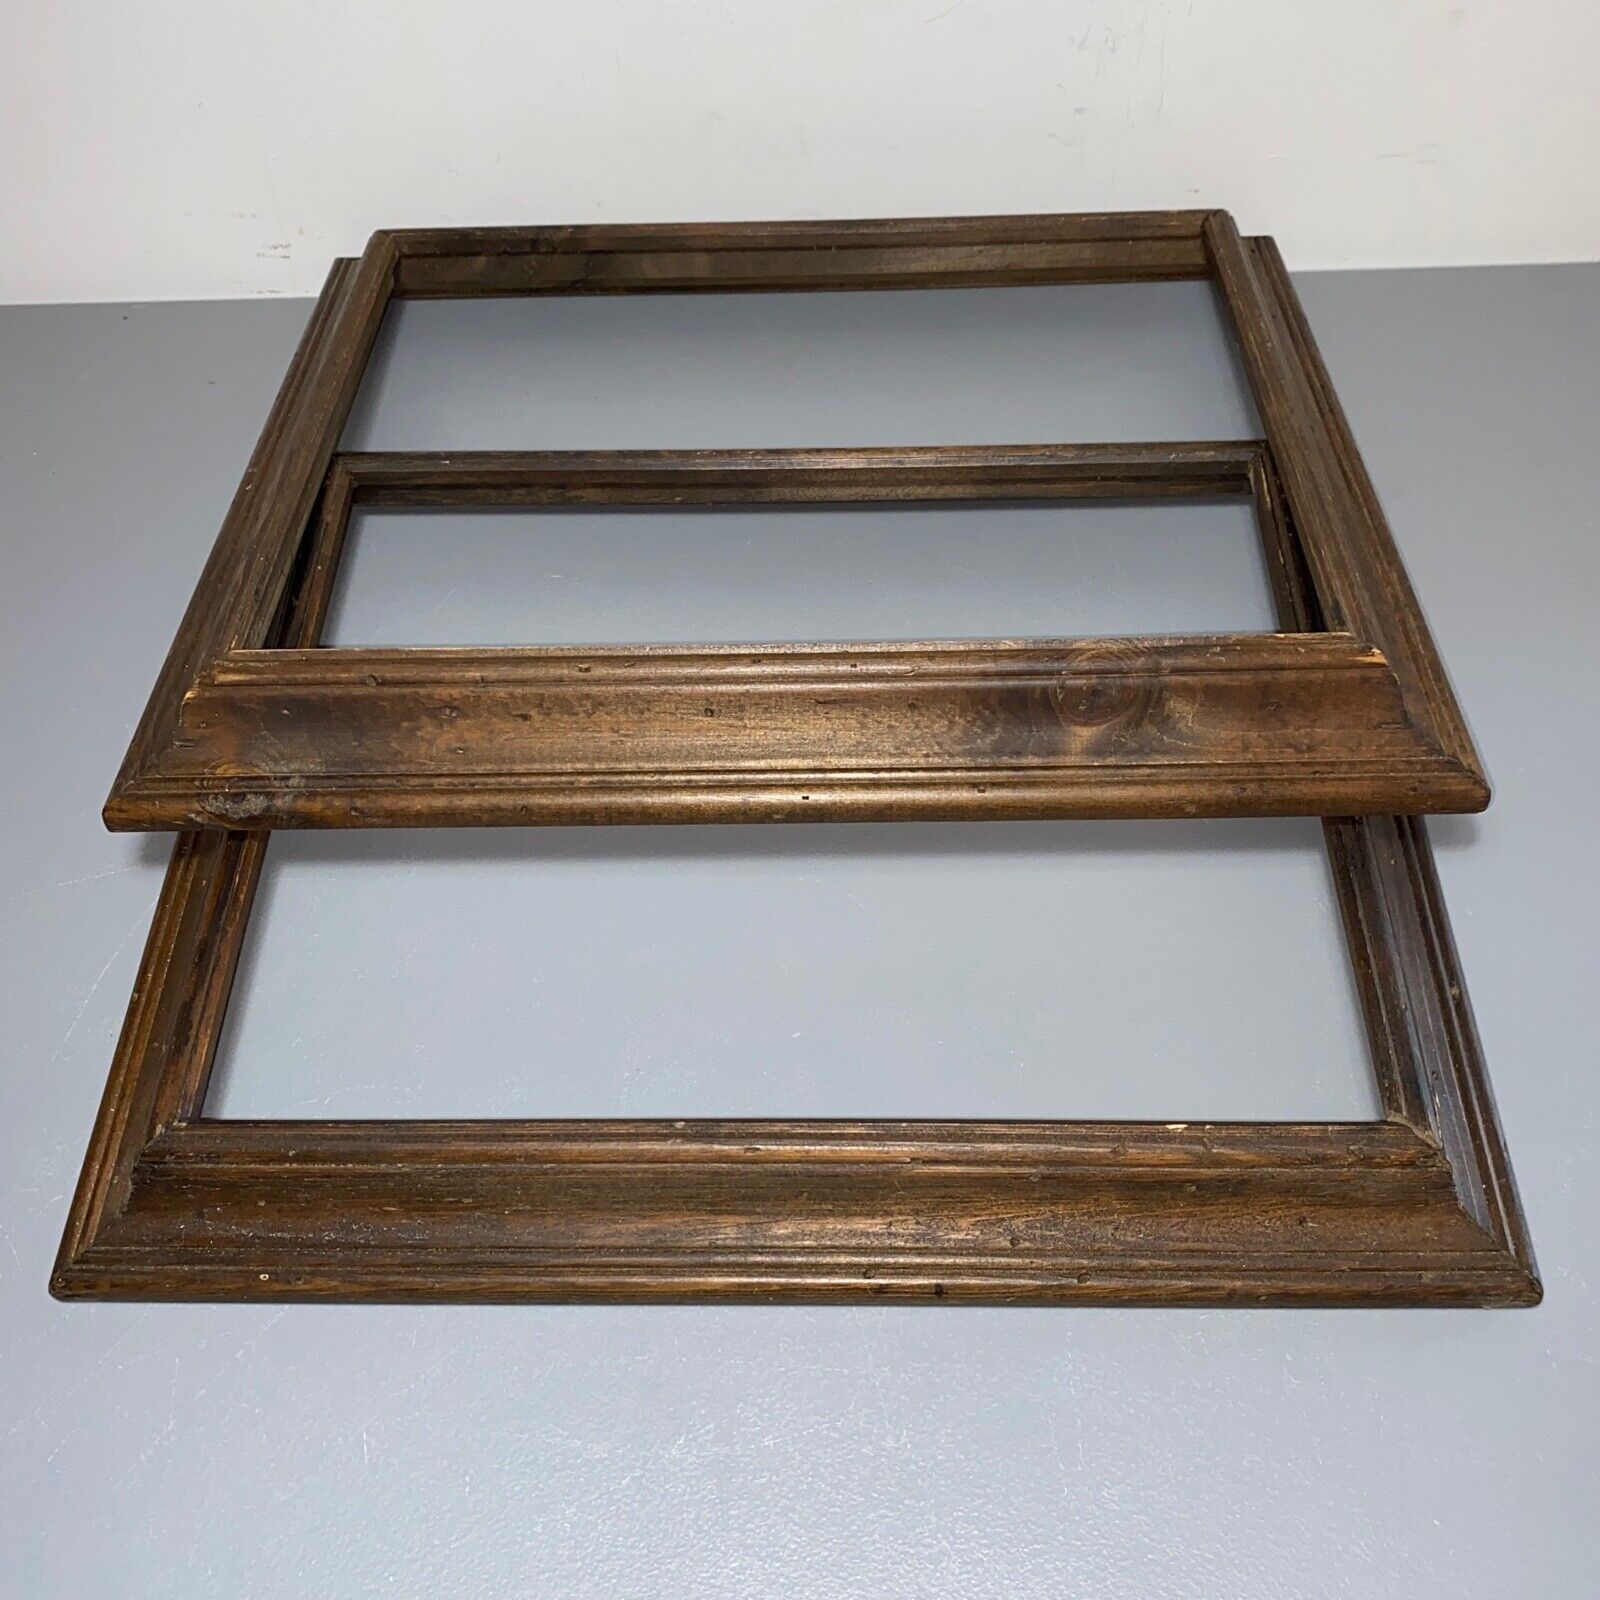 ANTIQUE ARTS CRAFTS WOOD FRAME WITH WORM HOLES Lot of 2 VTG 11x14 fits painting